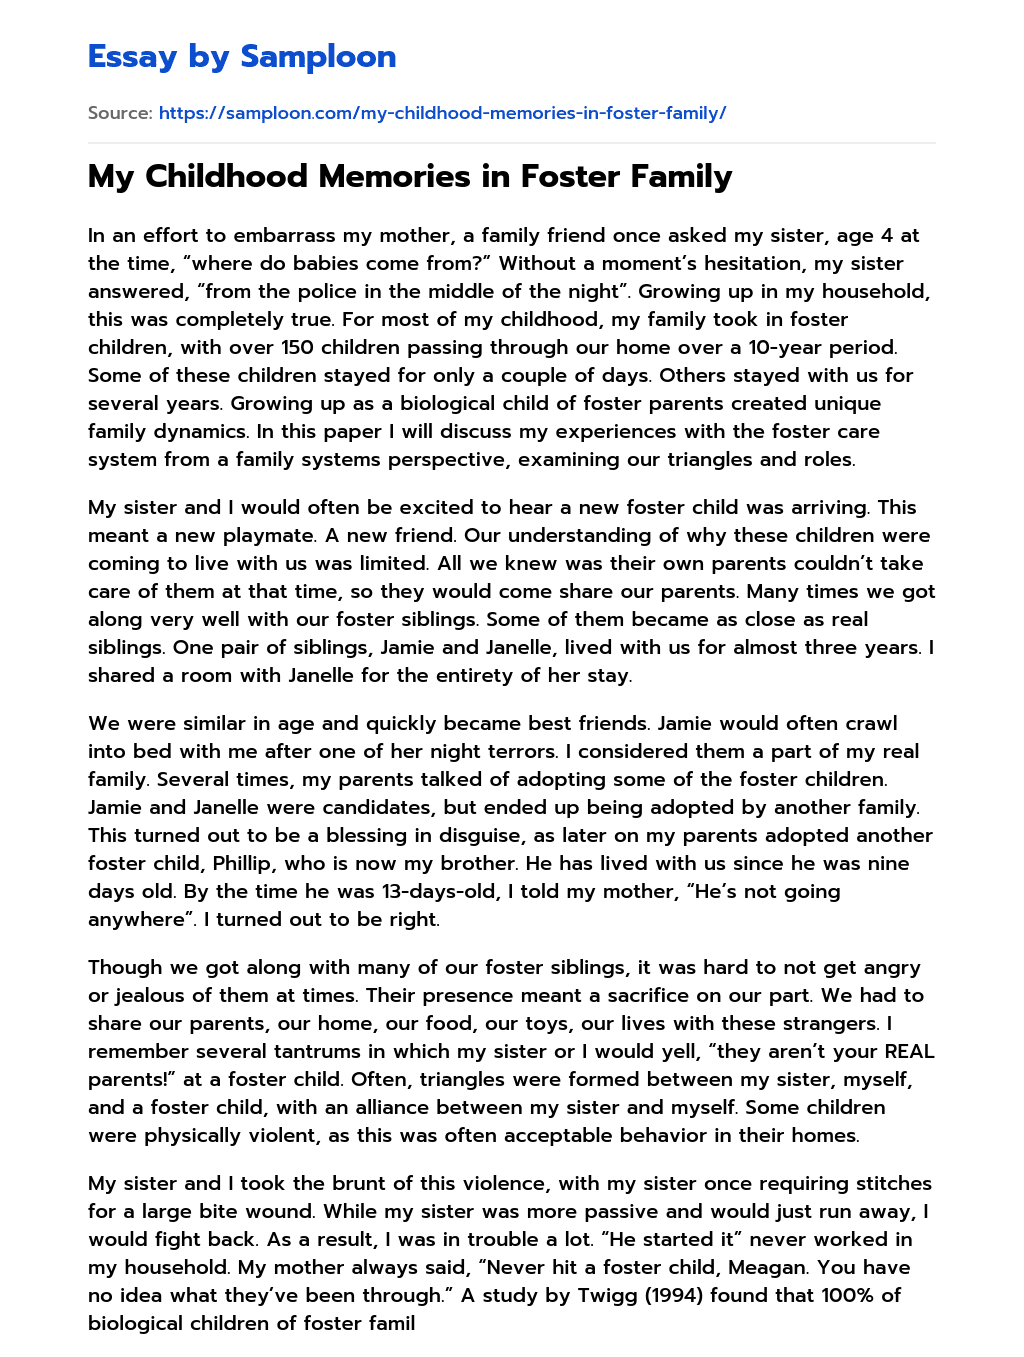 My Childhood Memories in Foster Family essay